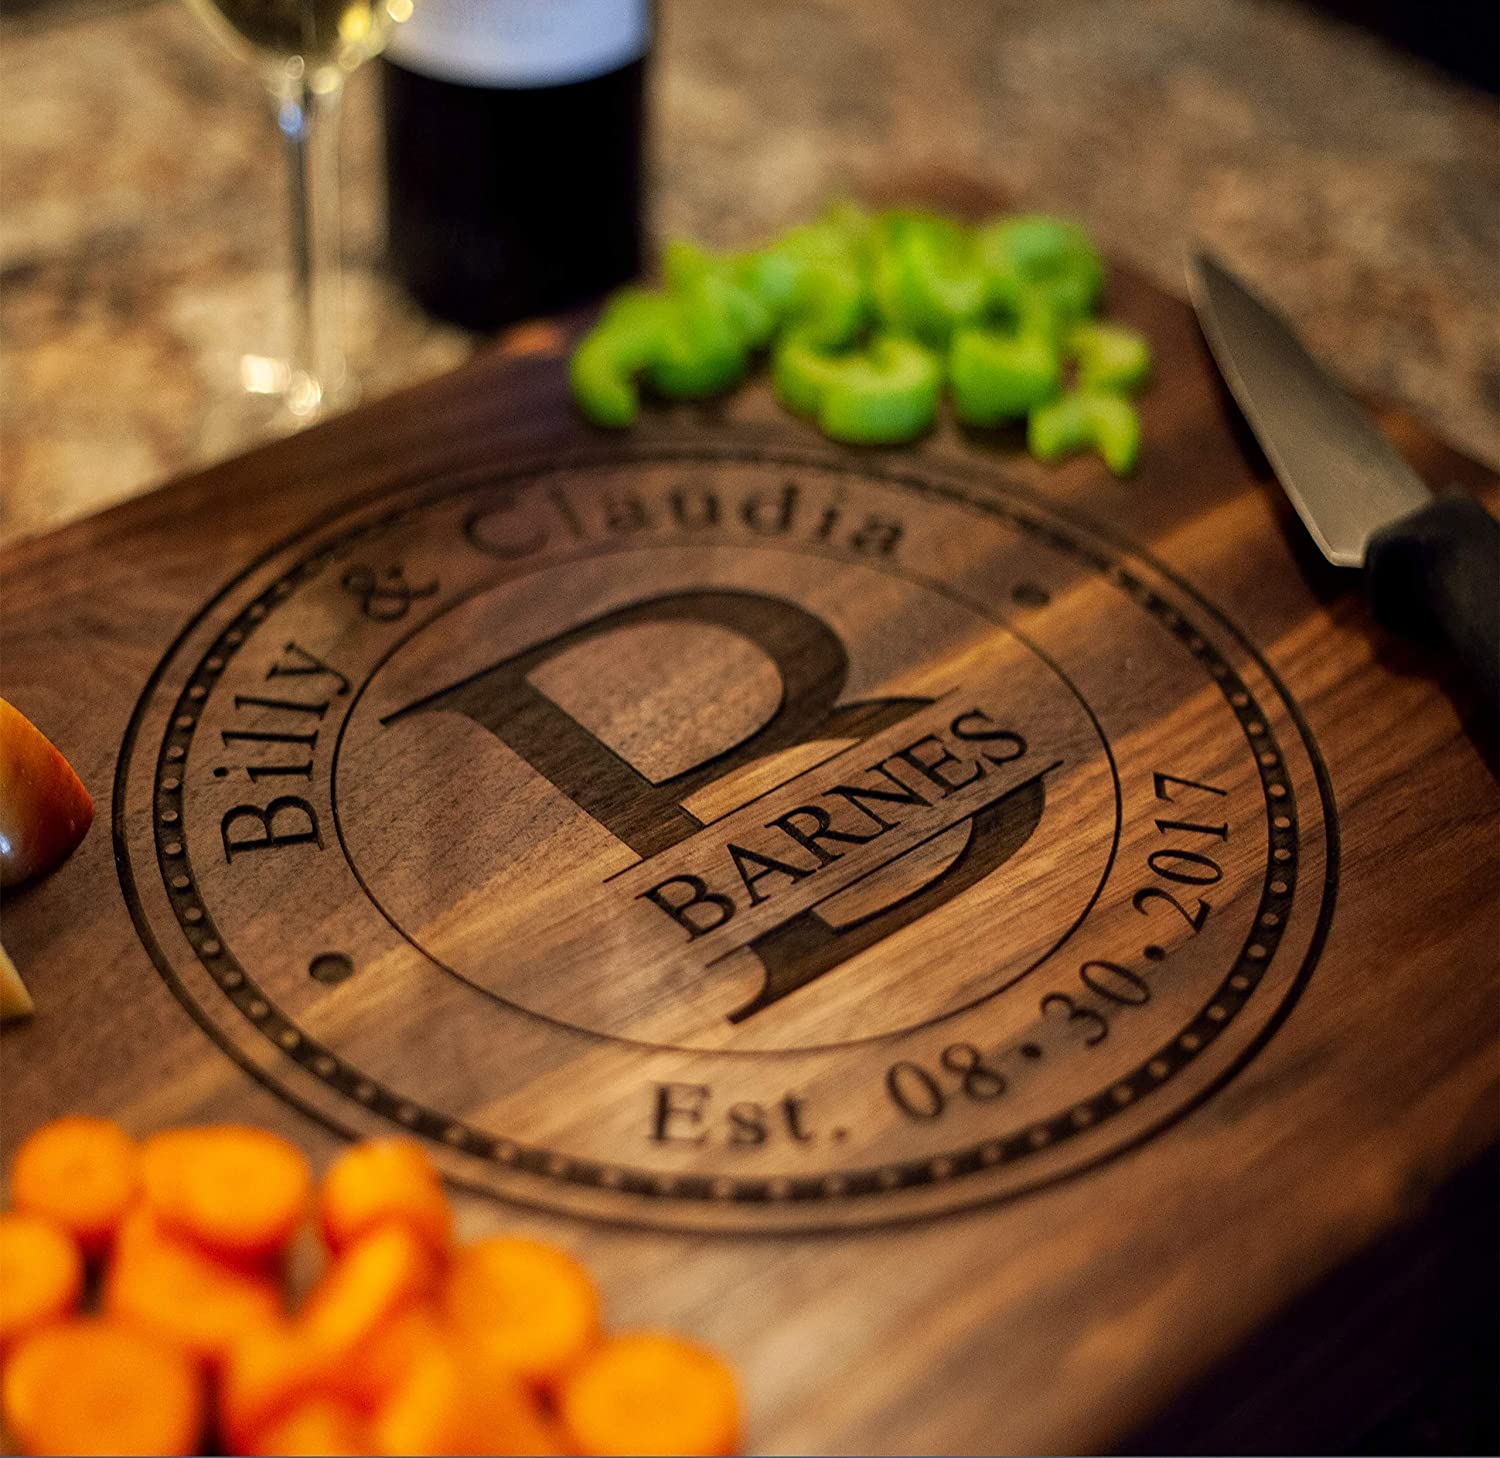 Personalized Cutting Board, USA Handmade Cutting Board - Personalized Gifts - Wedding Gifts for the Couple, Engagement Gifts, Gift for Parents